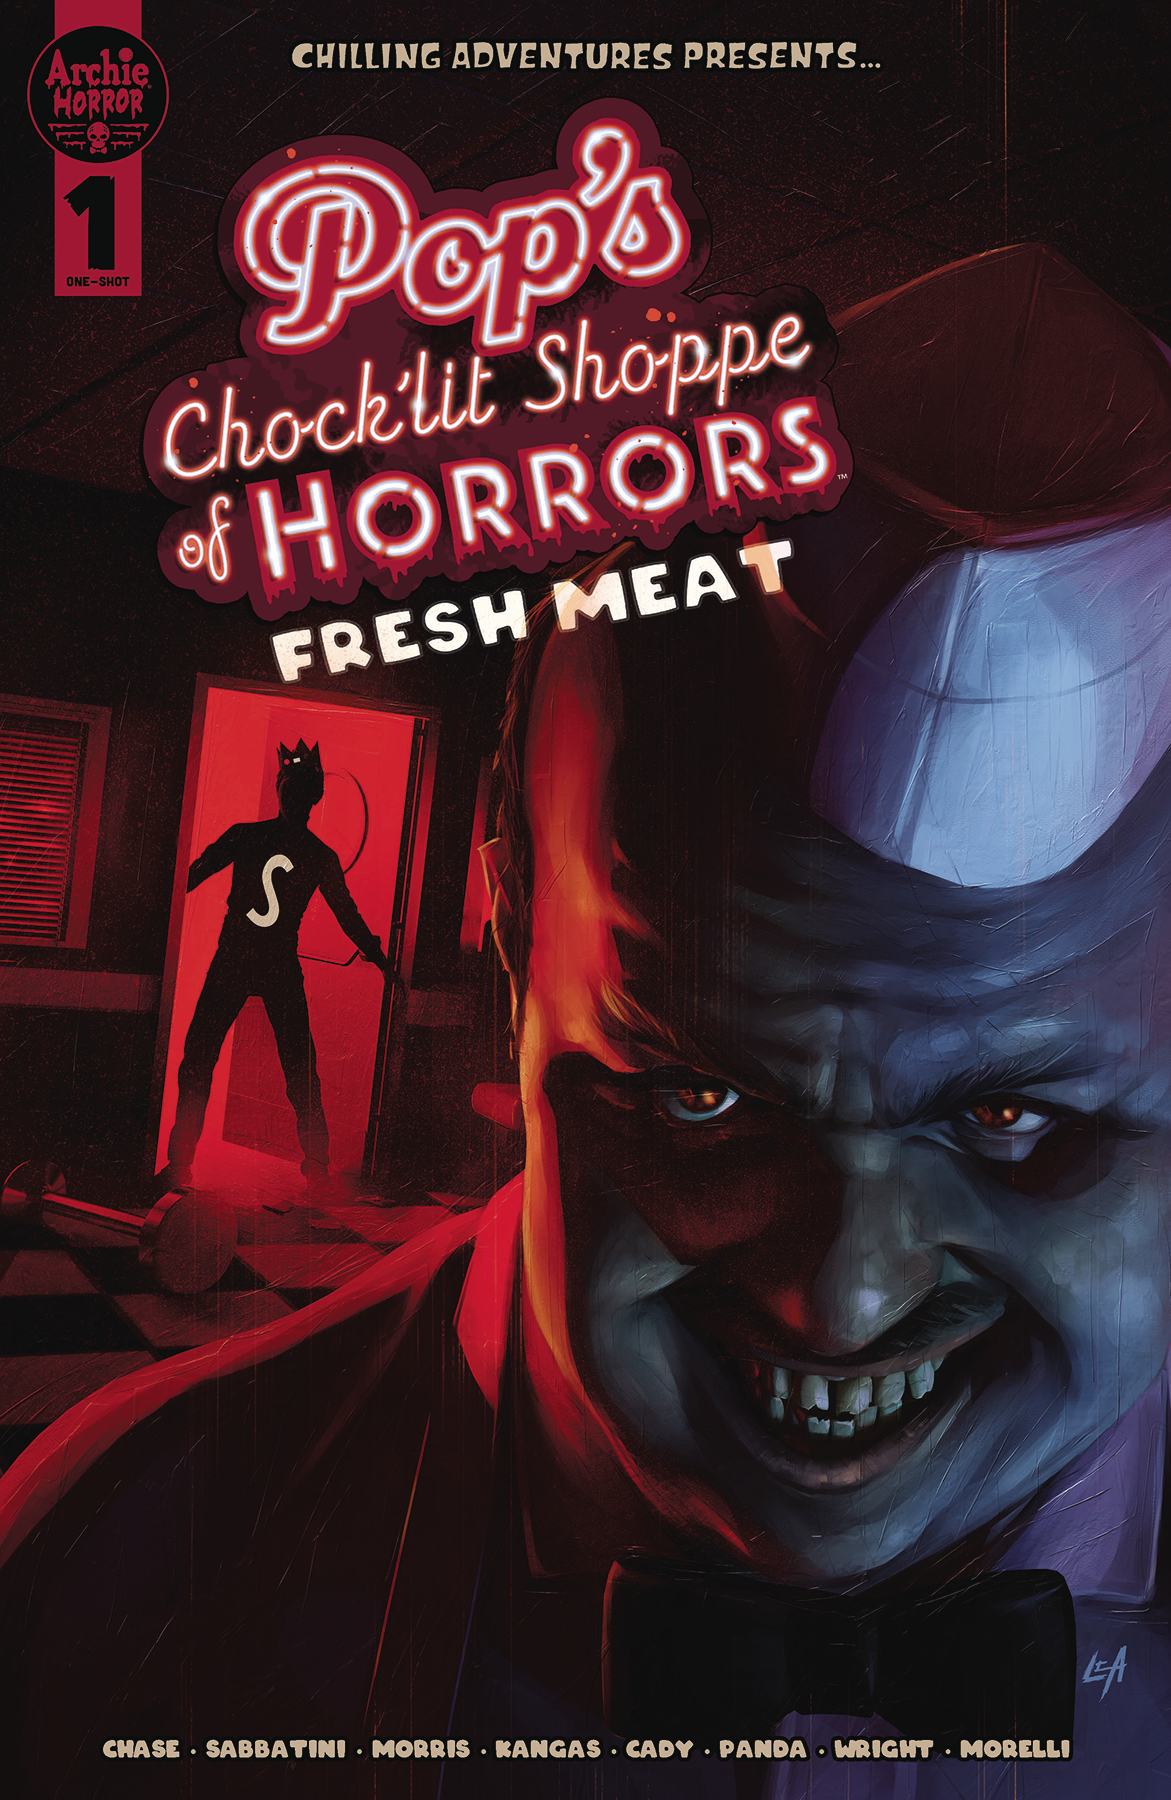 Pops Chocklit Shoppe of Horrors Fresh Meat Cover B Aaron Lea